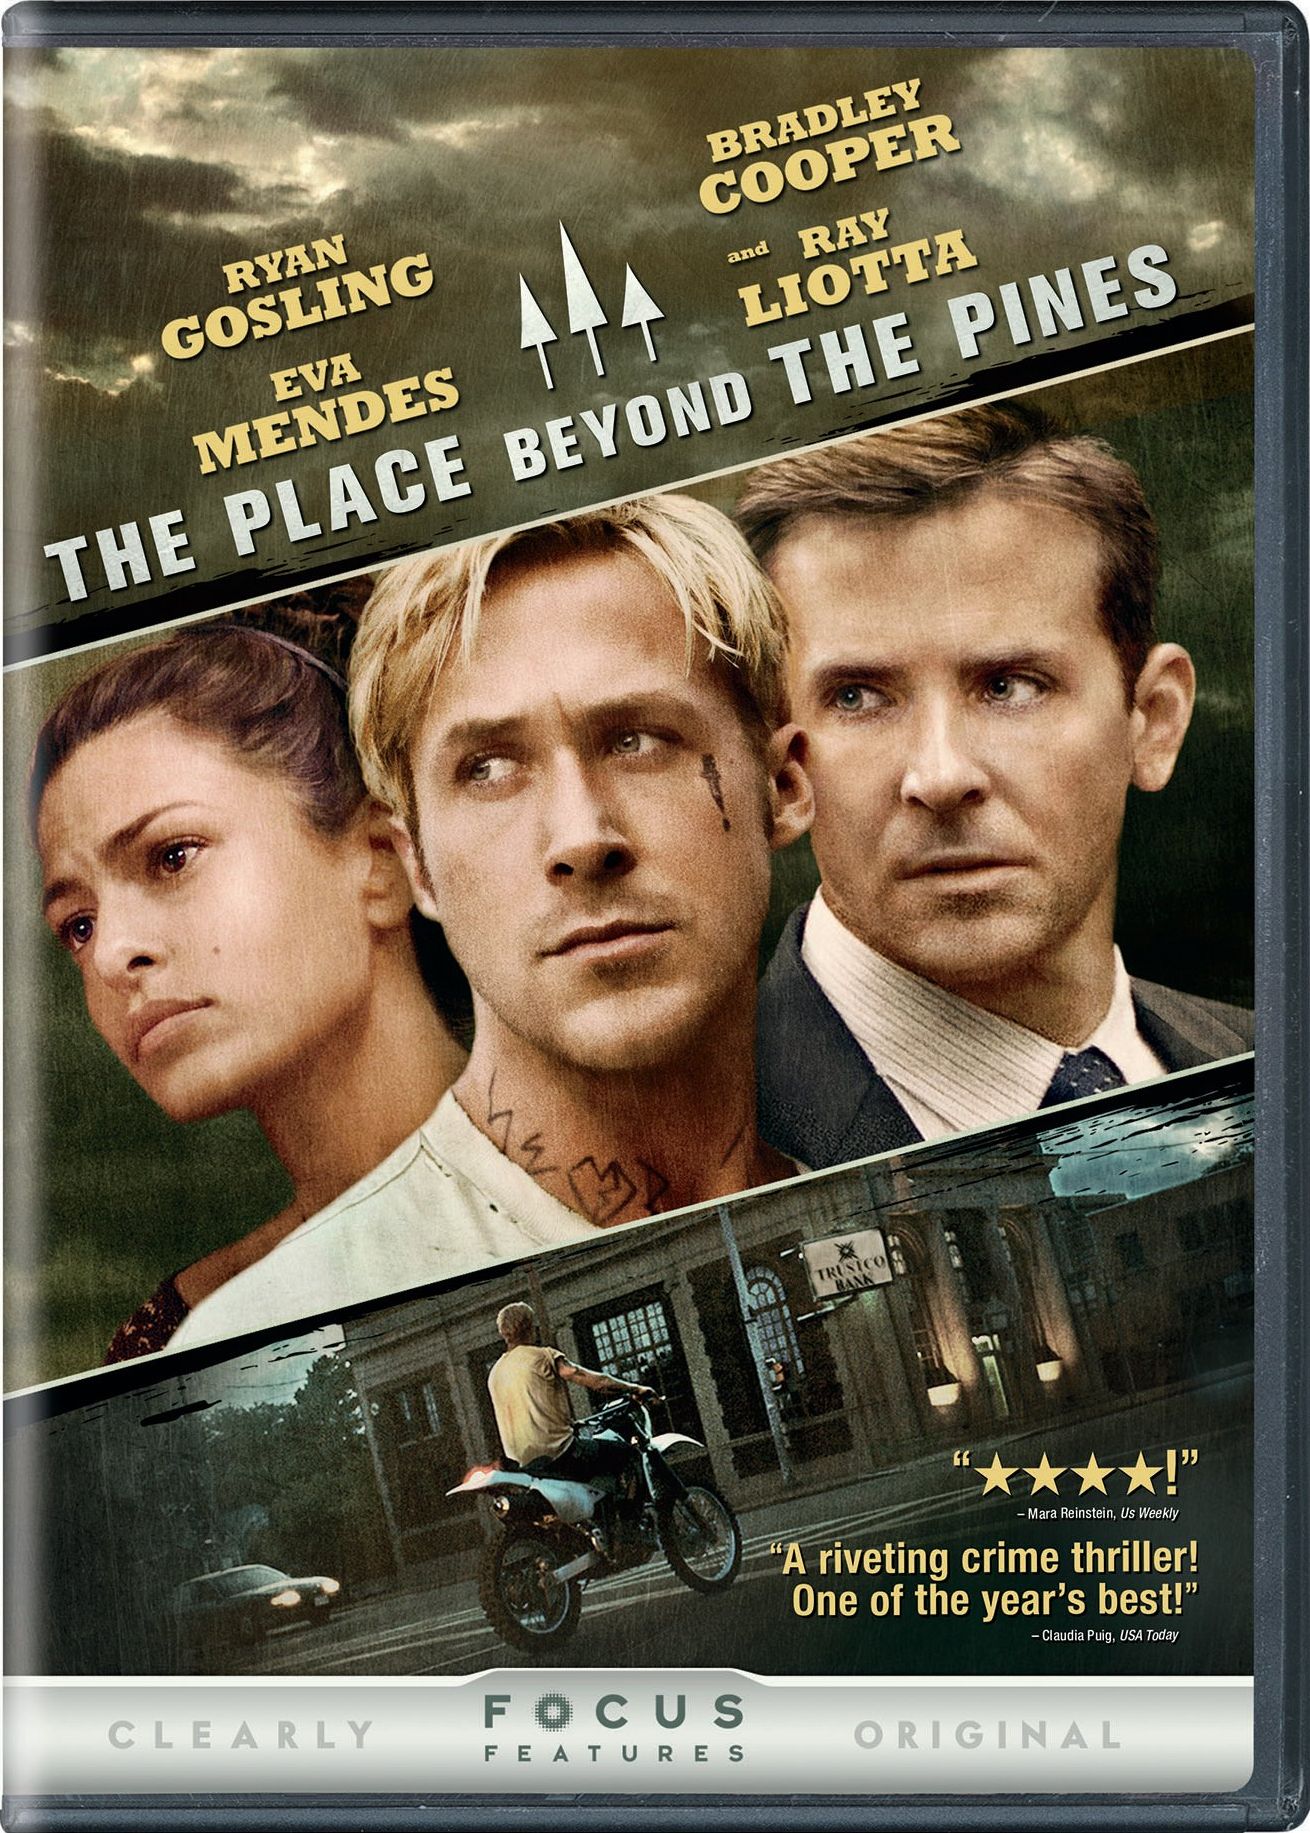 Ryan and Eva last appeared together in the 2013 film, The Place Beyond the Pines